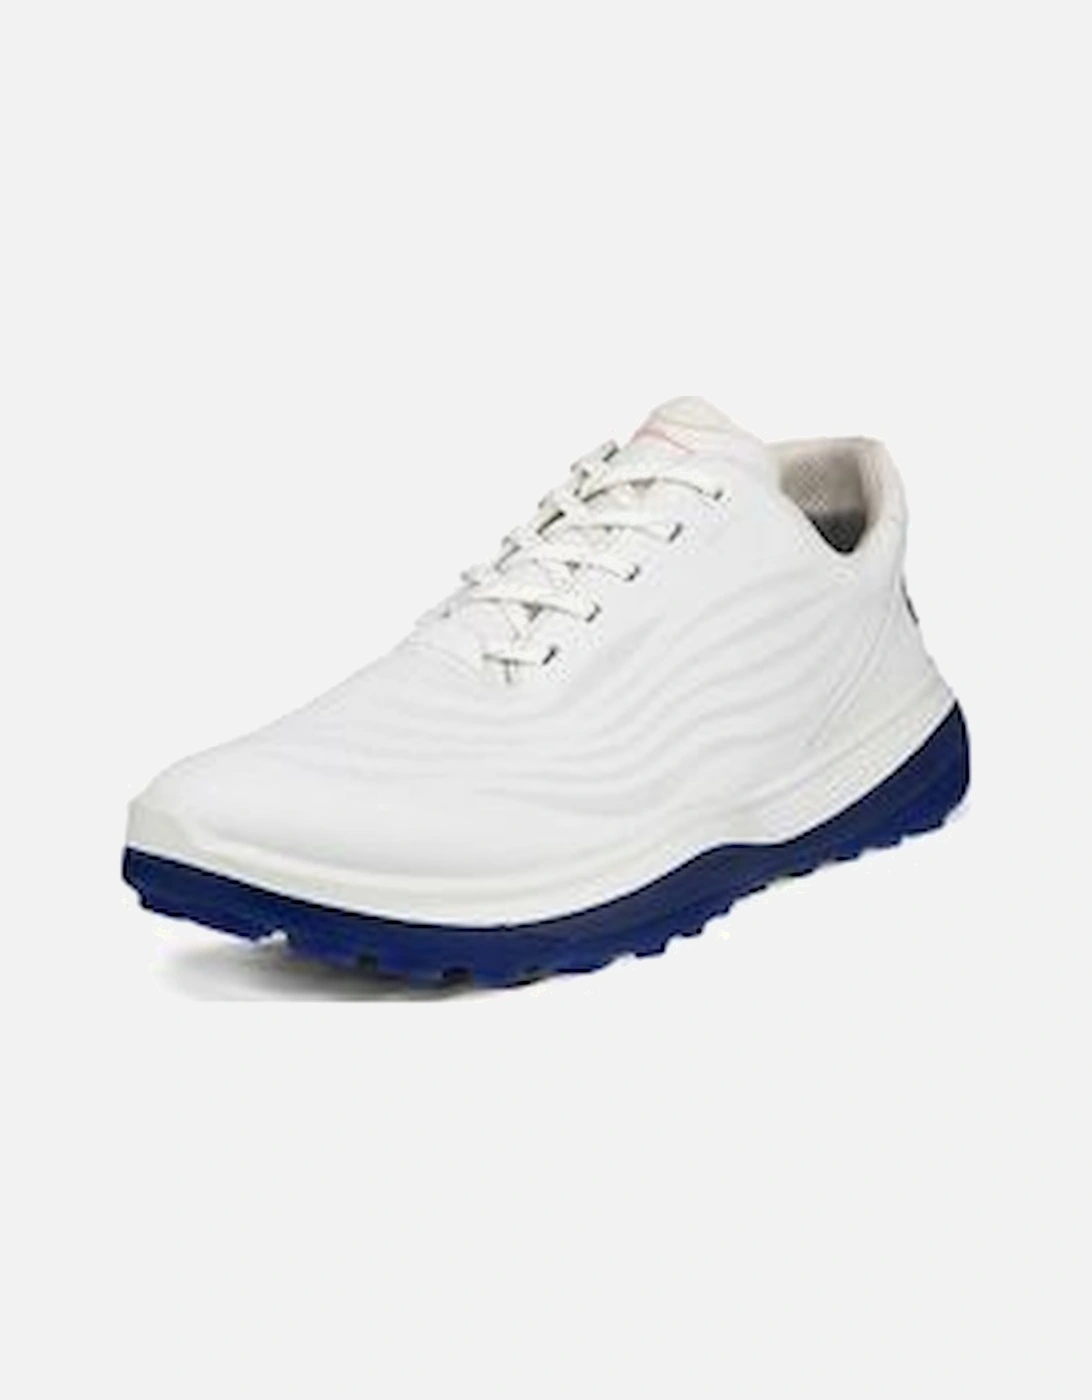 Golf Lt1 132264-11007 Mens White leather Golf shoes, 2 of 1